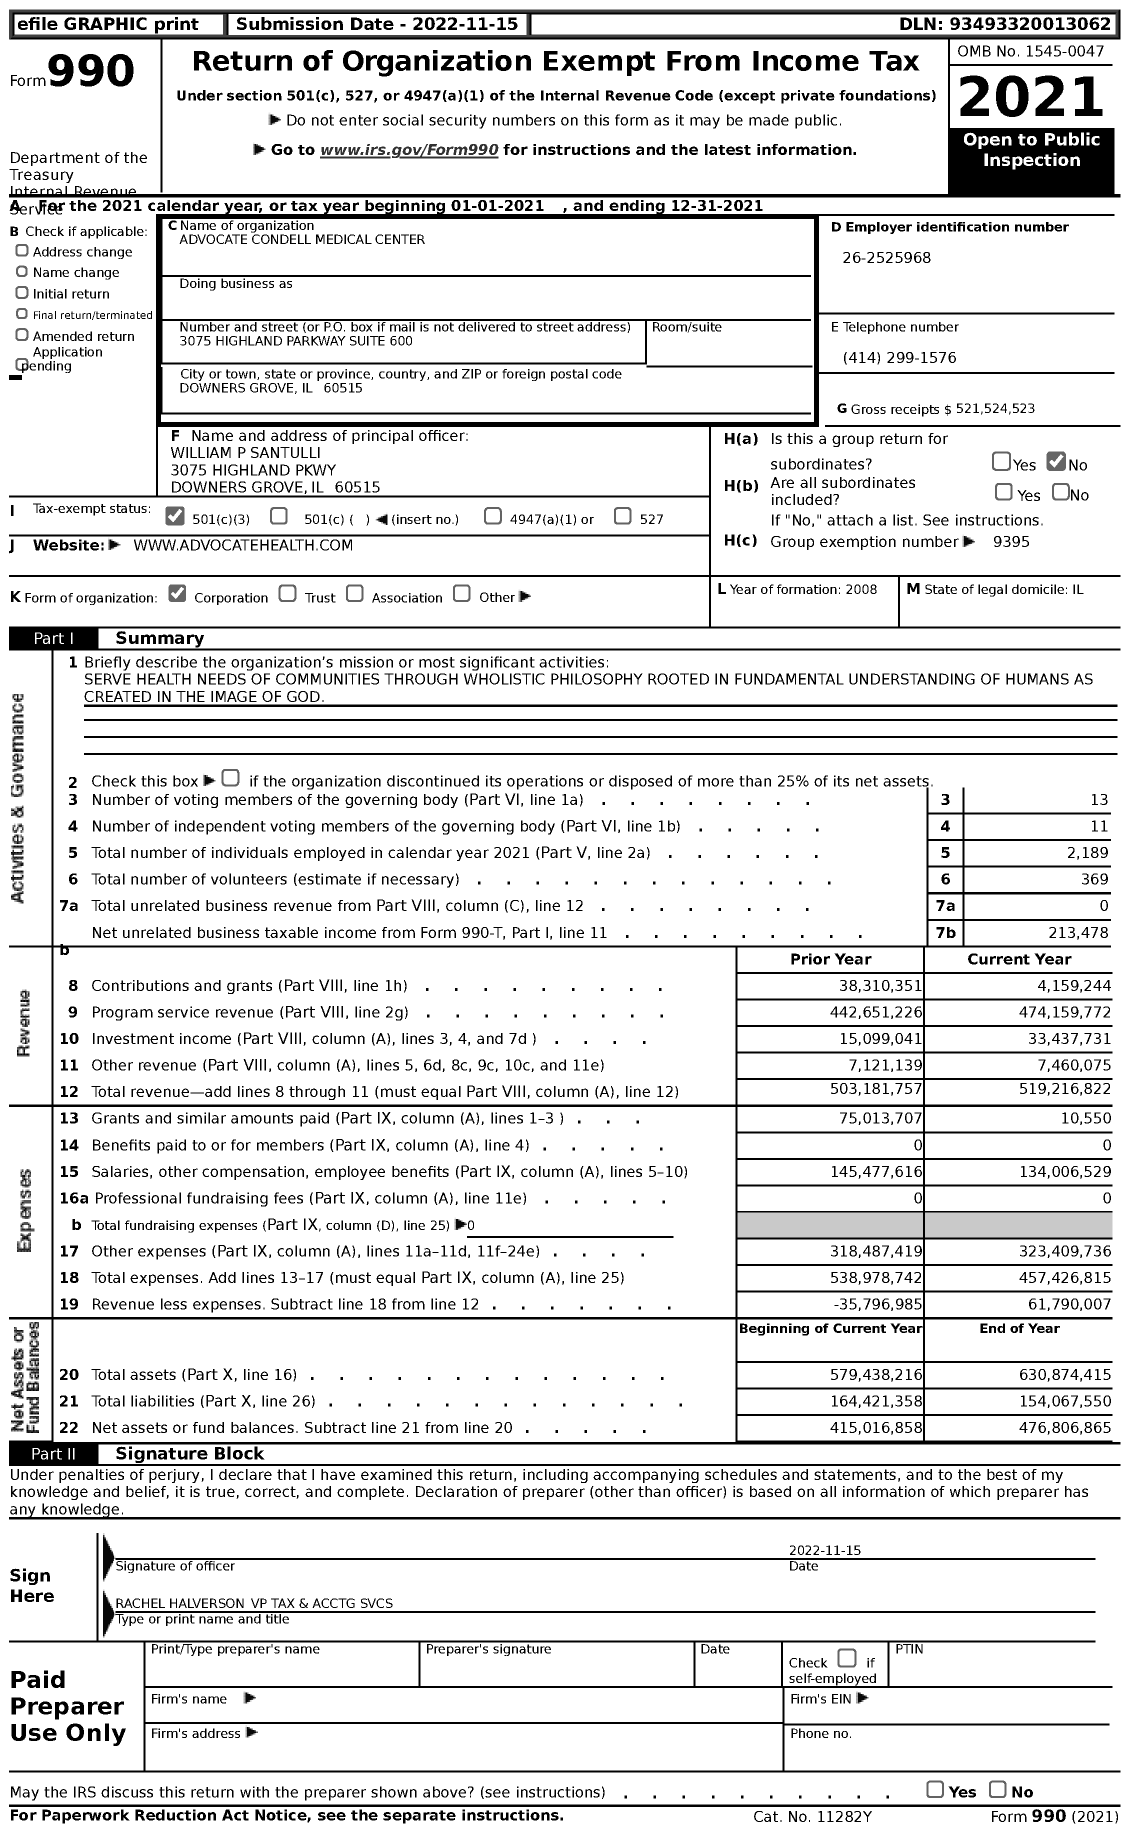 Image of first page of 2021 Form 990 for Advocate Condell Medical Center